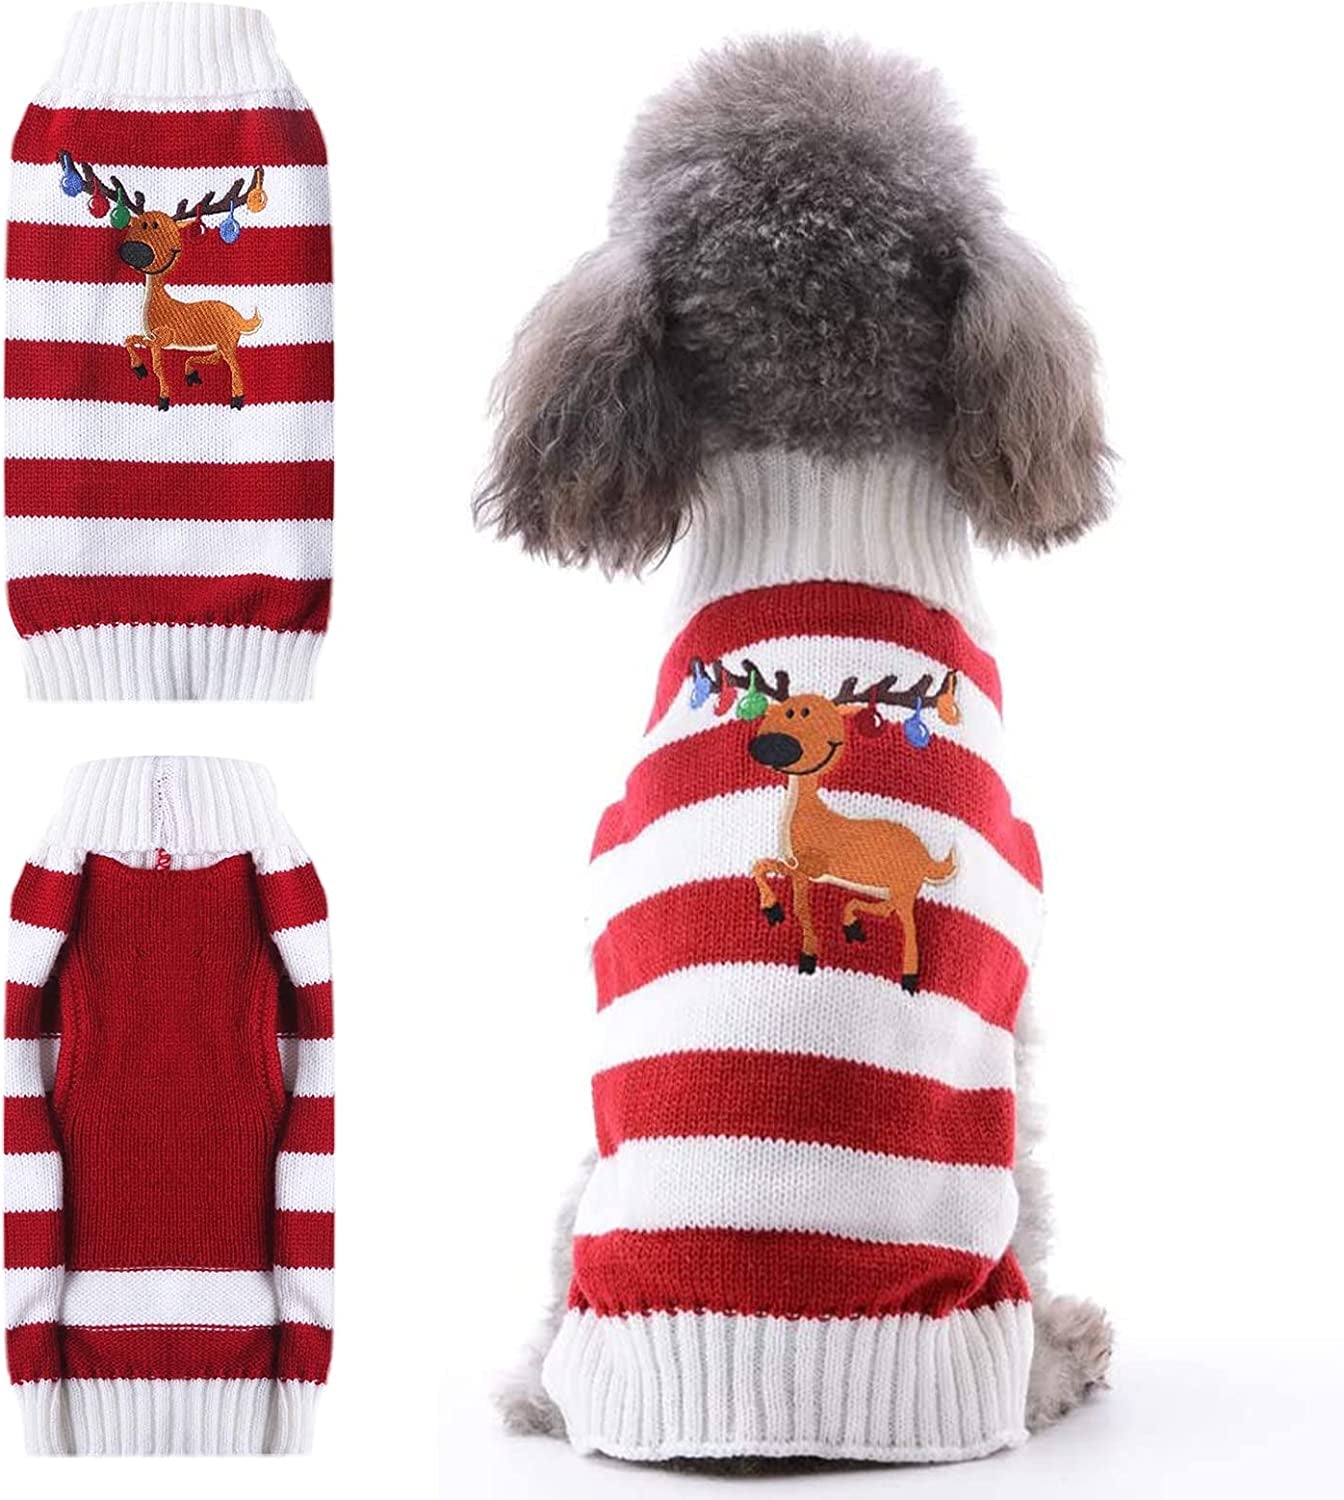 TENGZHI Dog Christmas Sweater Ugly Xmas Puppy Clothes Costume Warm Knitted Cat Outfit Jumper Cute Reindeer Pet Clothing for Small Medium Large Dogs Cats（S,Black）